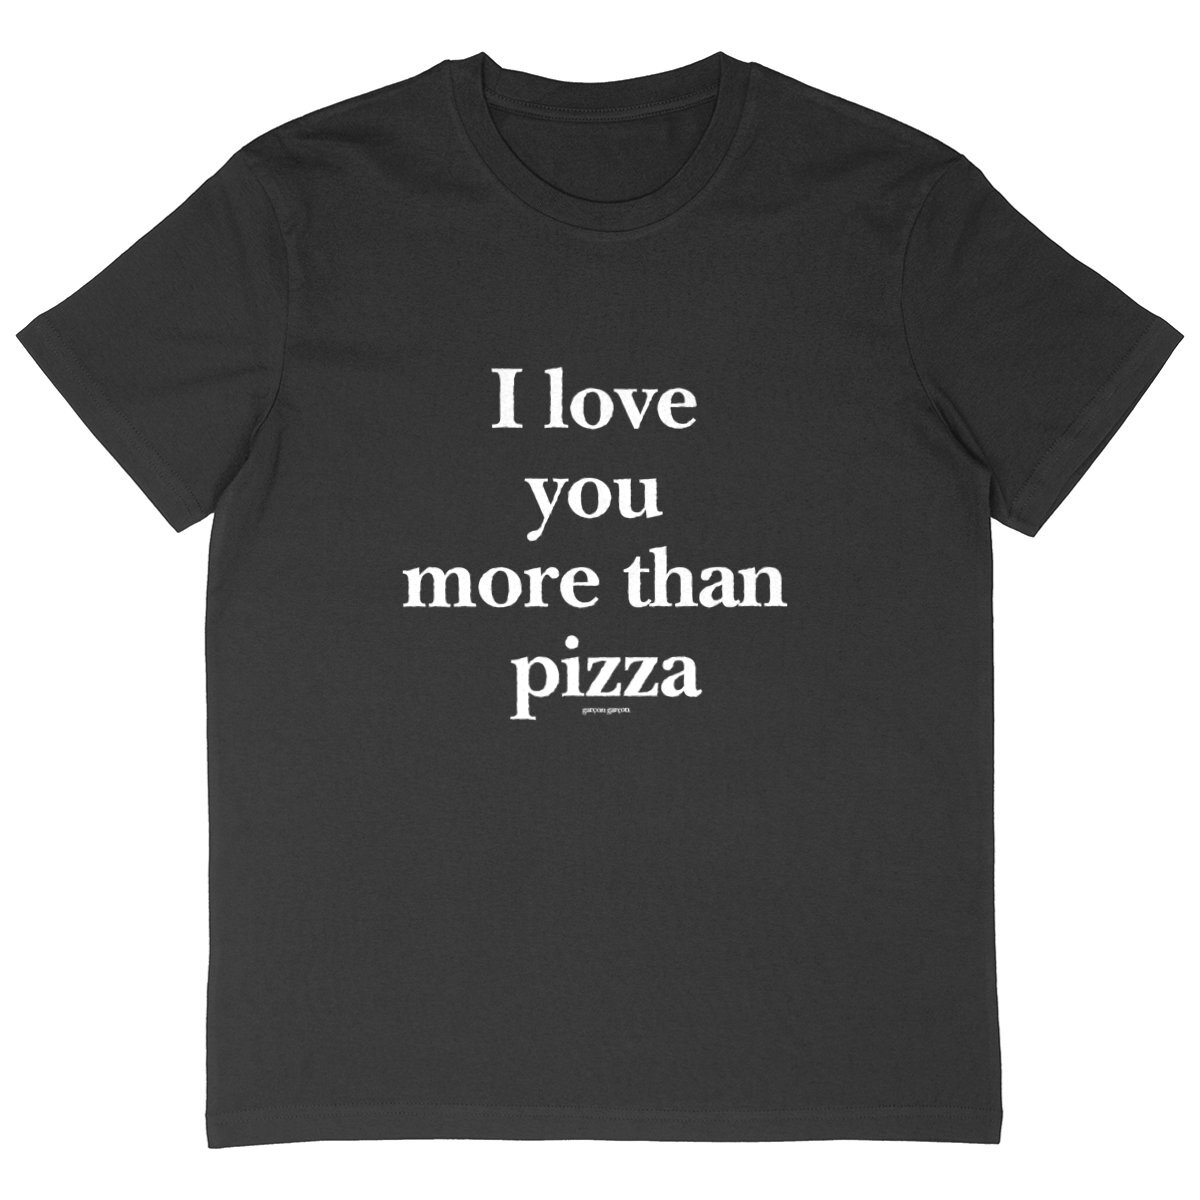 i love you more than pizza tee oversized. garçon garçon tee oversize BLACK. Dive into the essence of Parisian cool with this oversized tee. The subtle 'garçon garçon' signature whispers a chic narrative, offering a slice of the city's famed elegance. Perfect for those who speak style with simplicity.